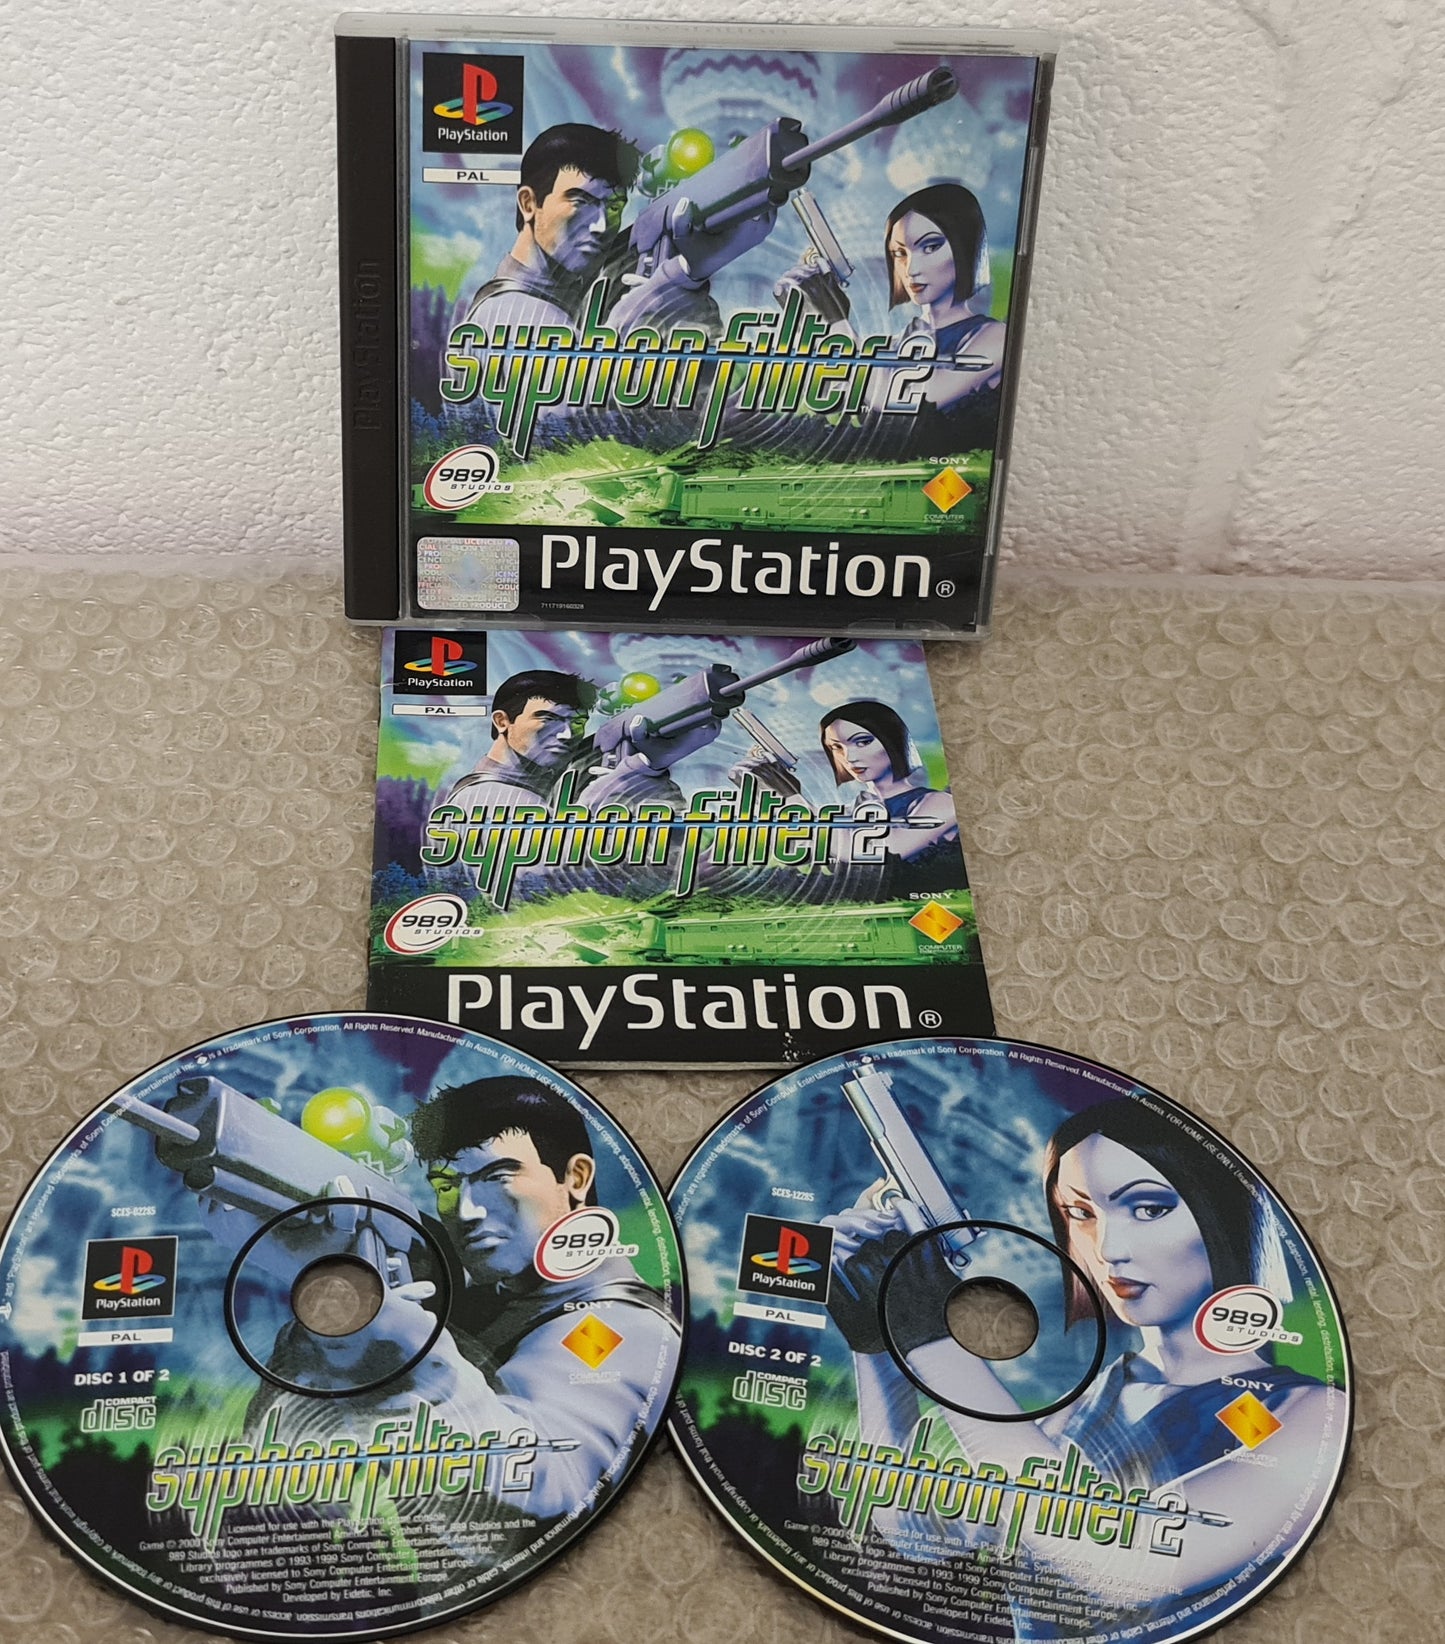 Syphon Filter 2 Black Label Sony Playstation 1 (PS1) Game